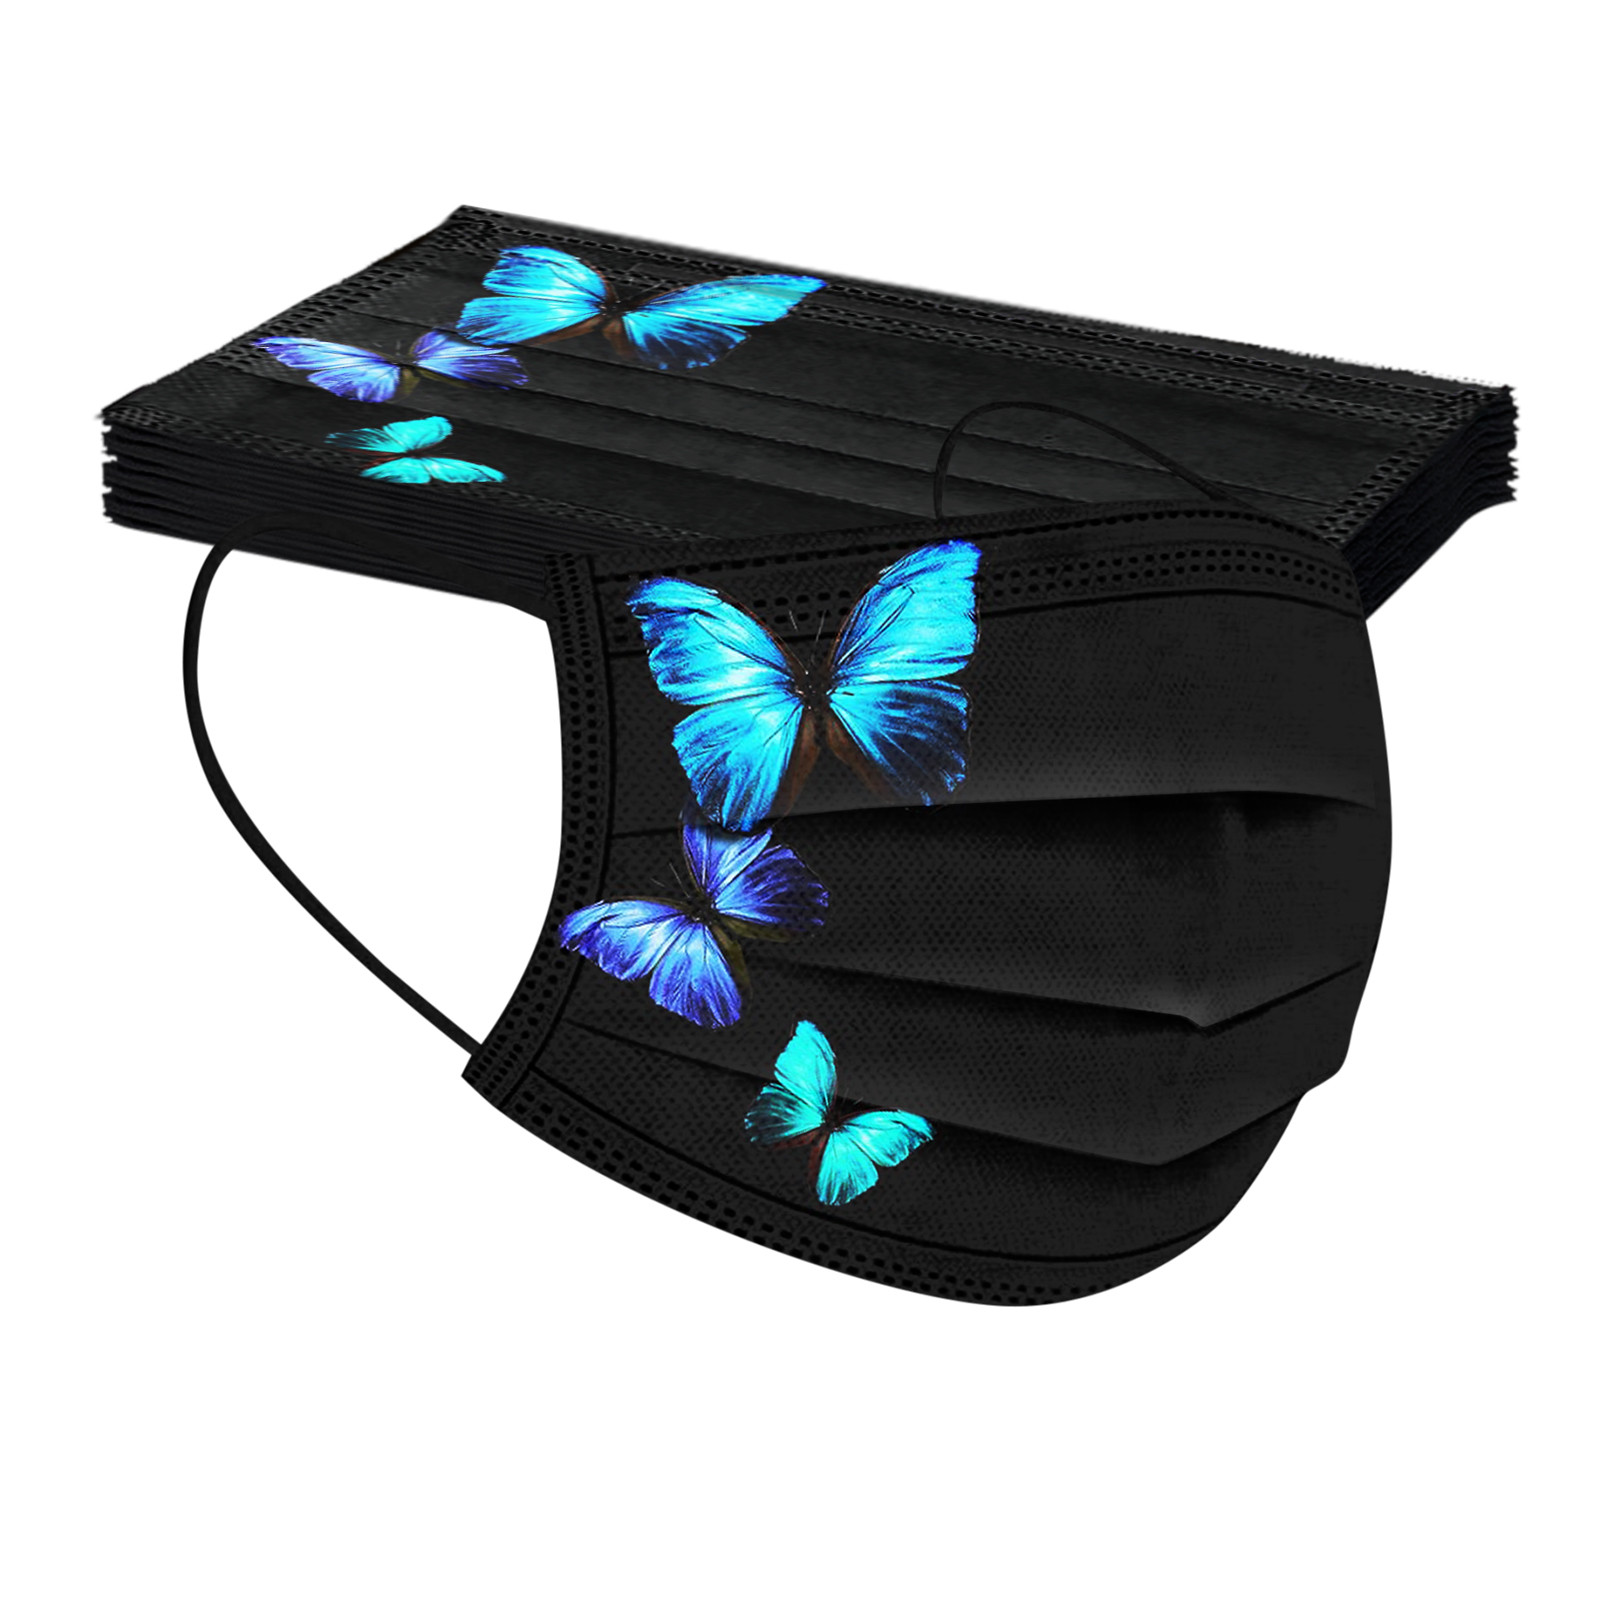 10PC Breathable Black Face Mask Butterfly Printed Masks Fabric Protective 3 layer Dust Mouth Cover Disposable Mouth Mask